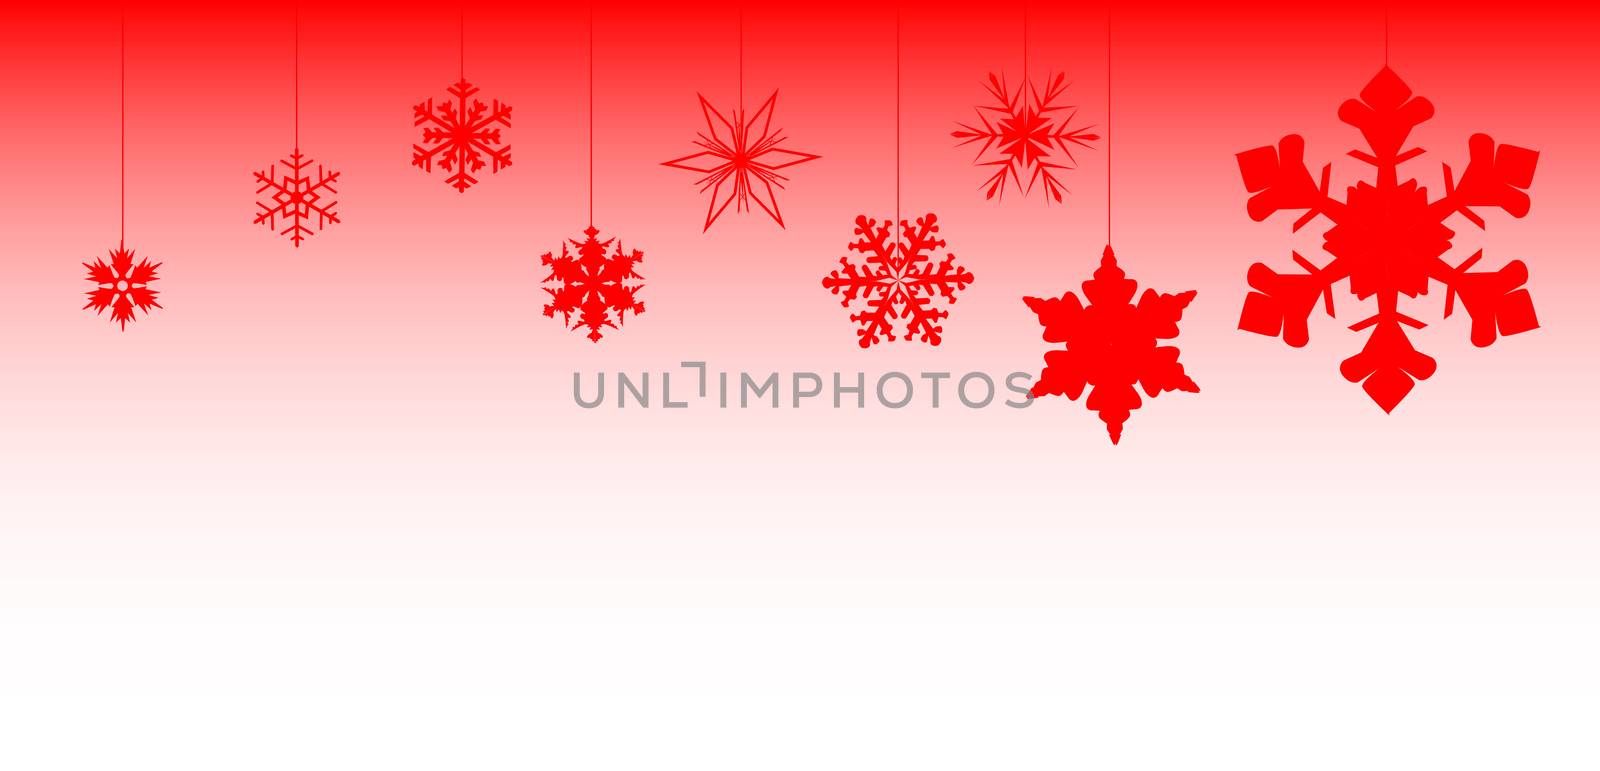 A banner of snowflakes in red over a red to white background